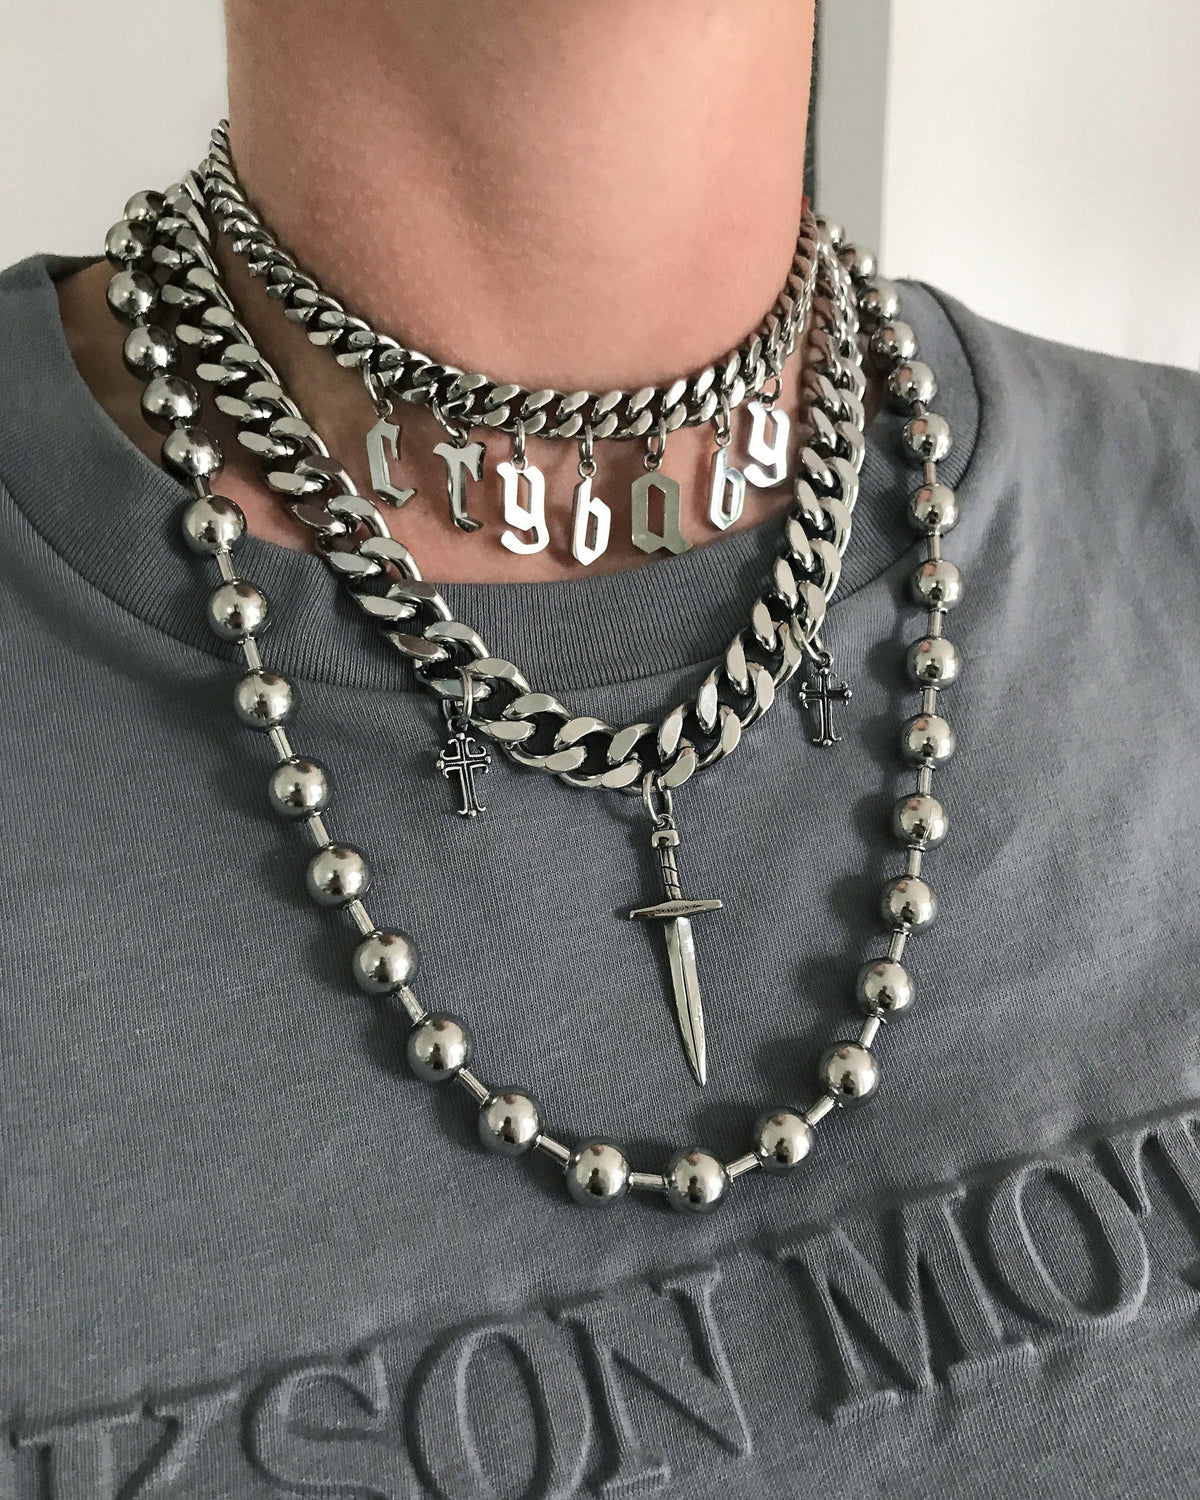 grunge jewelry by statement collective